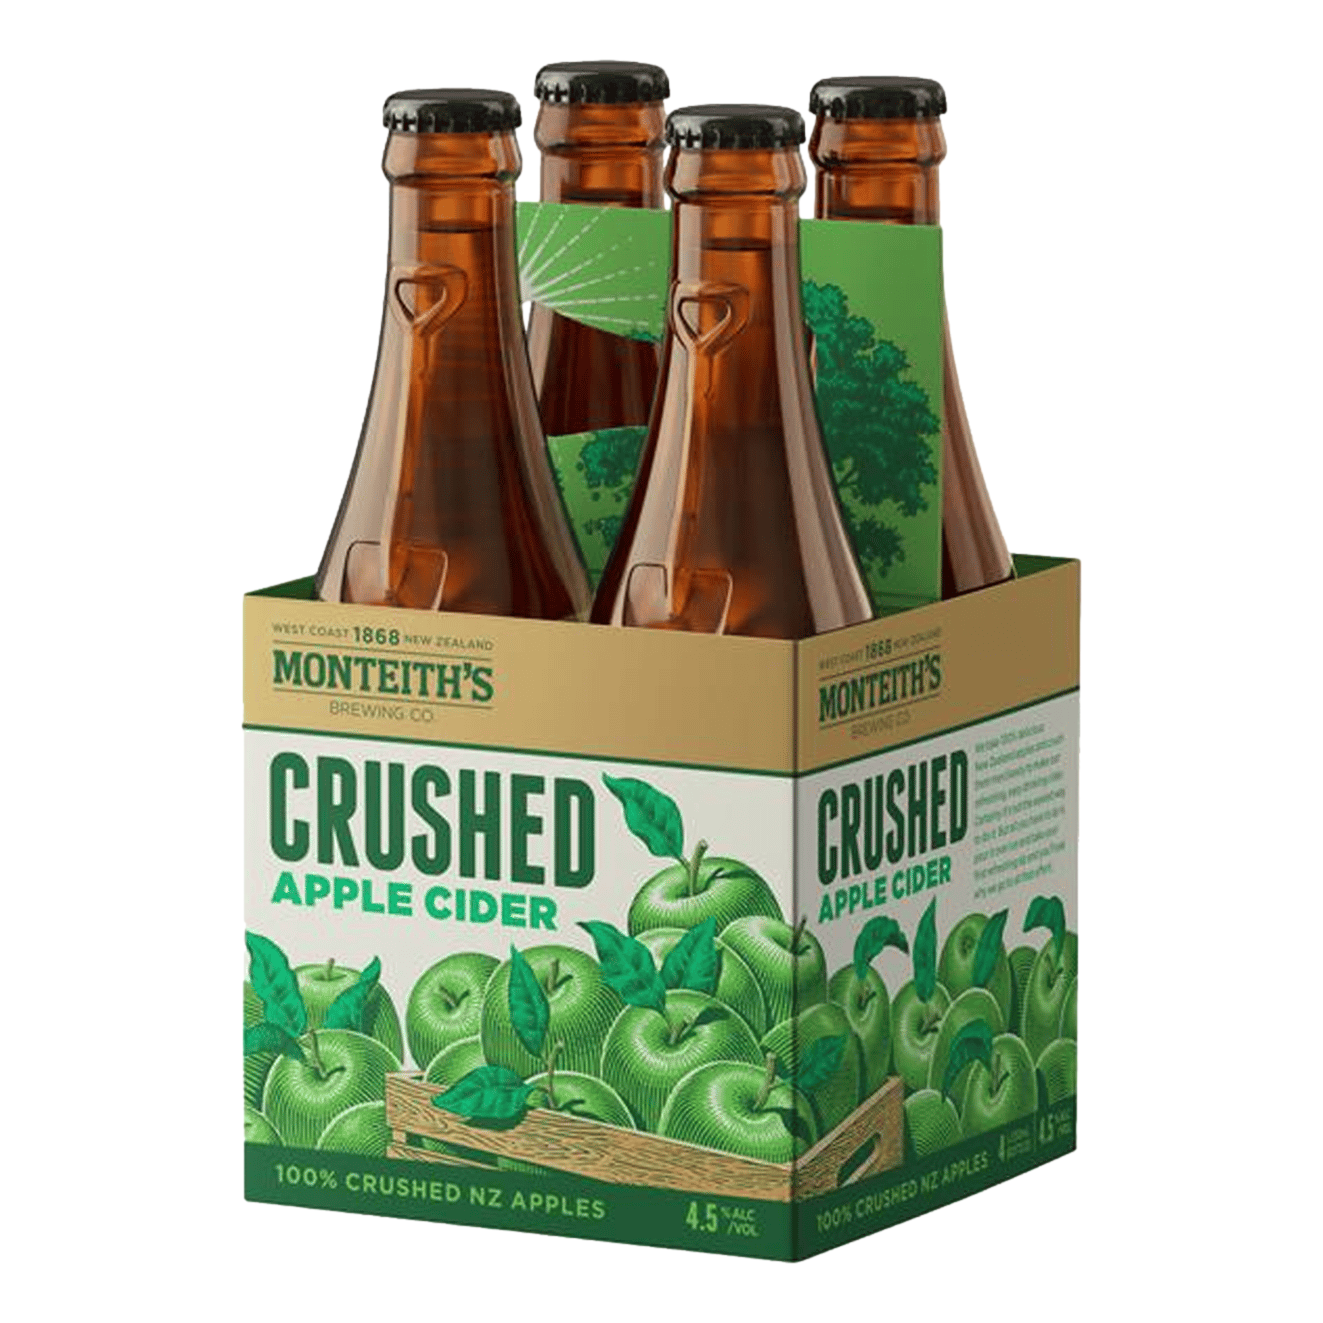 Monteith's Crushed Apple Cider 330ml Bottle 4 Pack